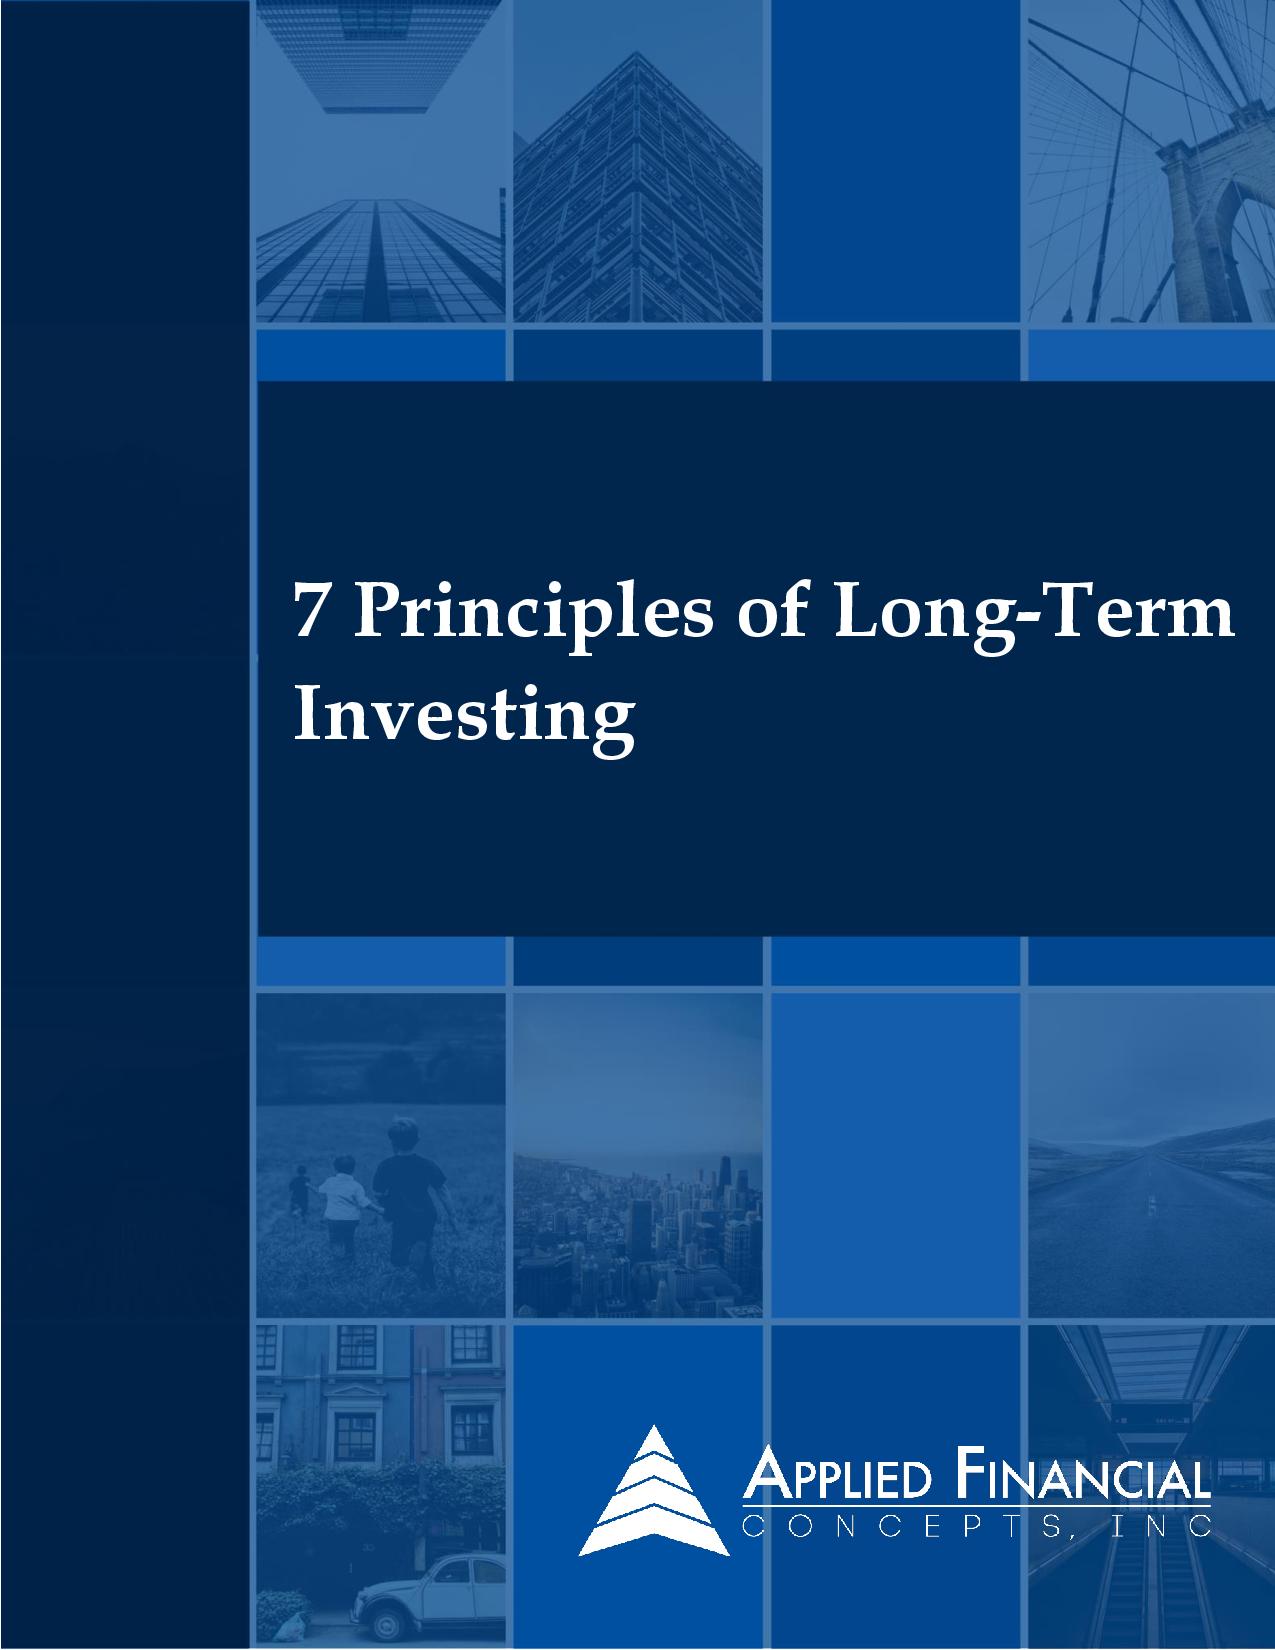 7 Principal of Long Term investing picture.jpg